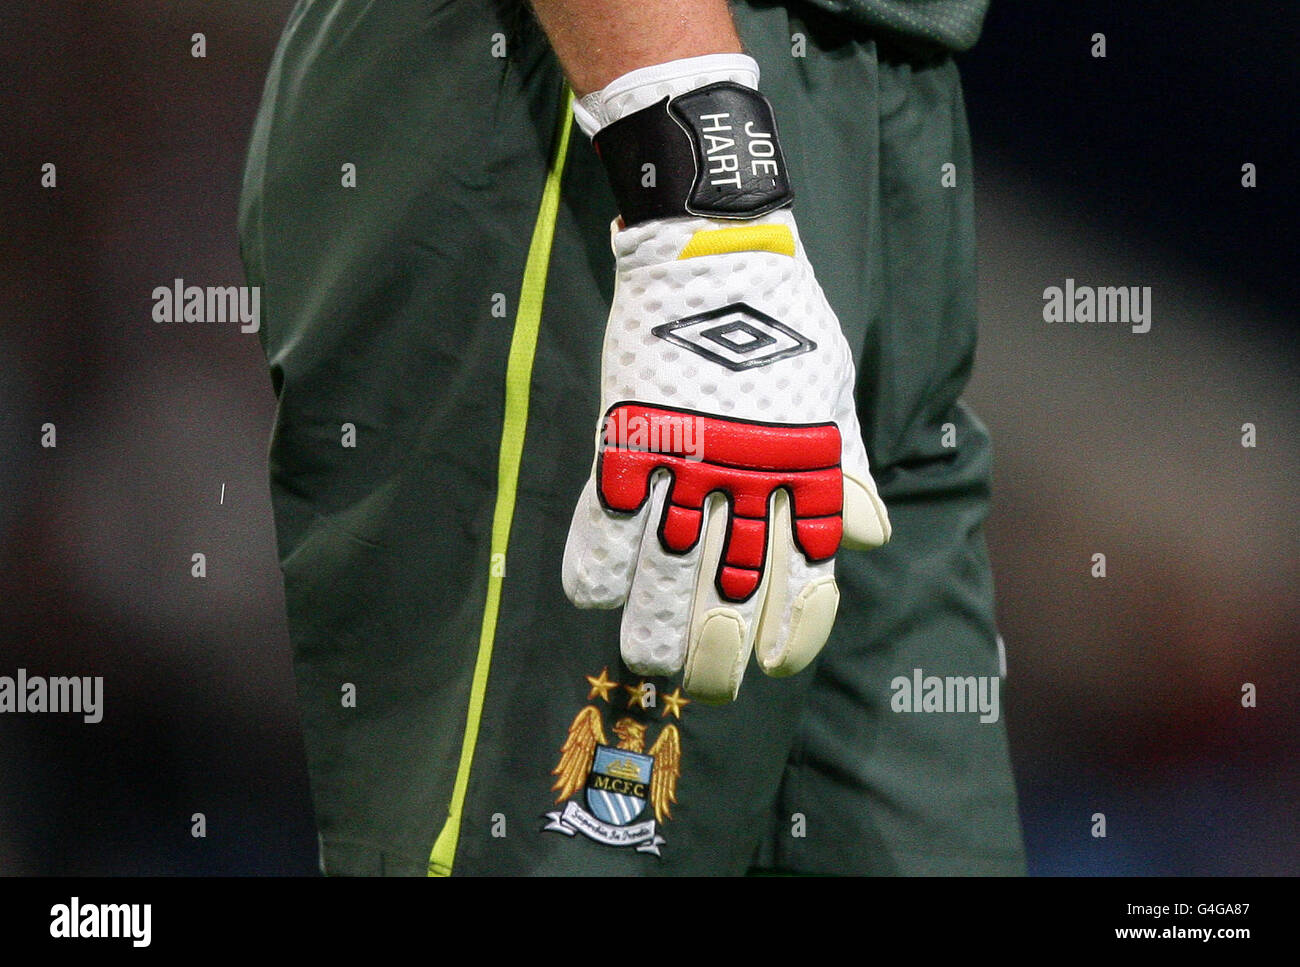 View of detail on Manchester City goal keeper Joe Hart's gloves and shorts  during the Barclays Premier League match at the Etihad Stadium, Manchester  Stock Photo - Alamy